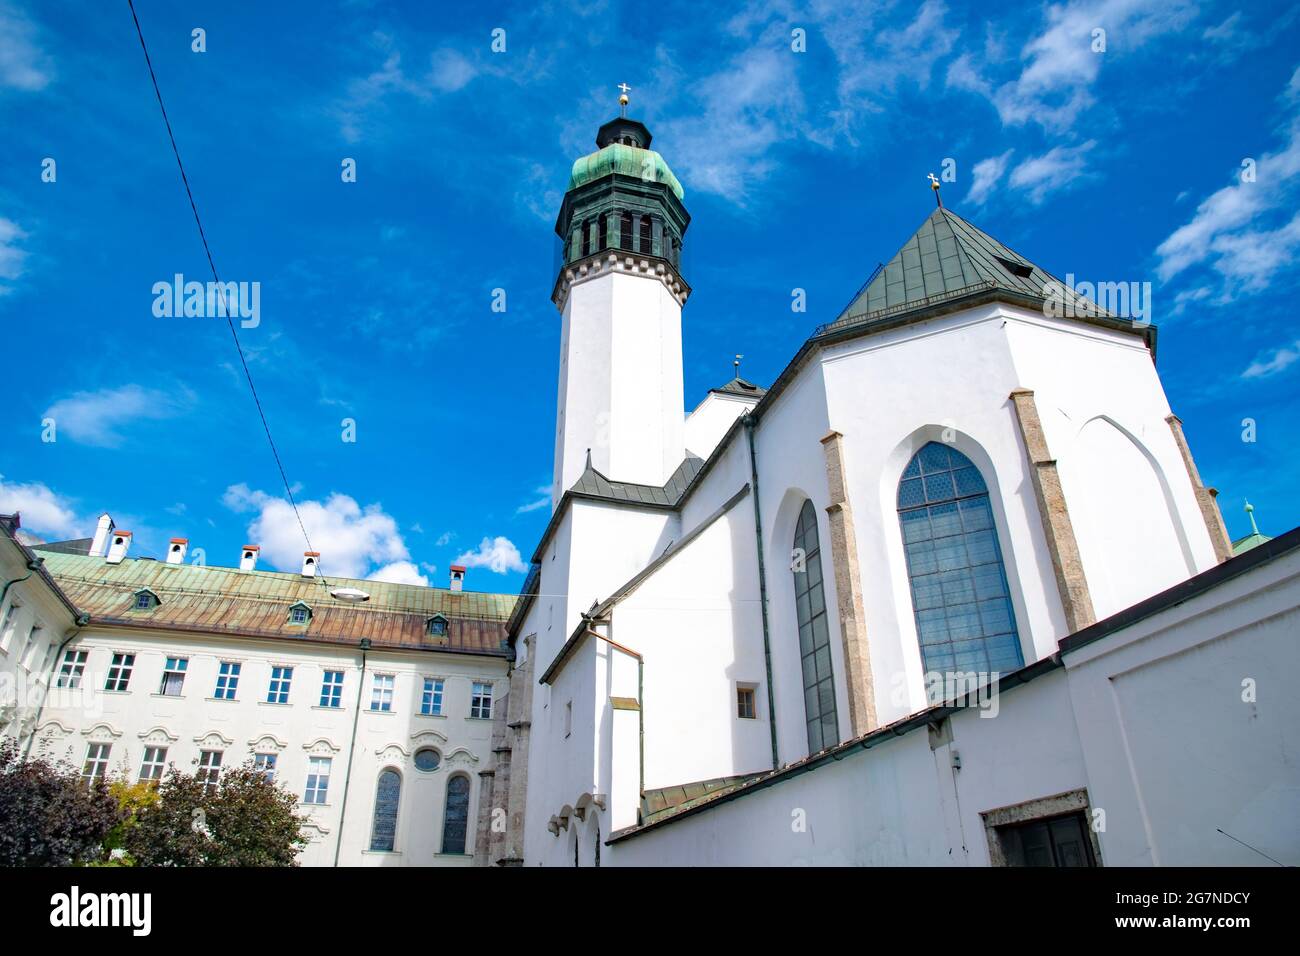 Innsbruck Hofkirche or Gothic Court Church which is located in the Altstadt Old Town. Taken in Innsbruck, Austria on October 15 2016 Stock Photo